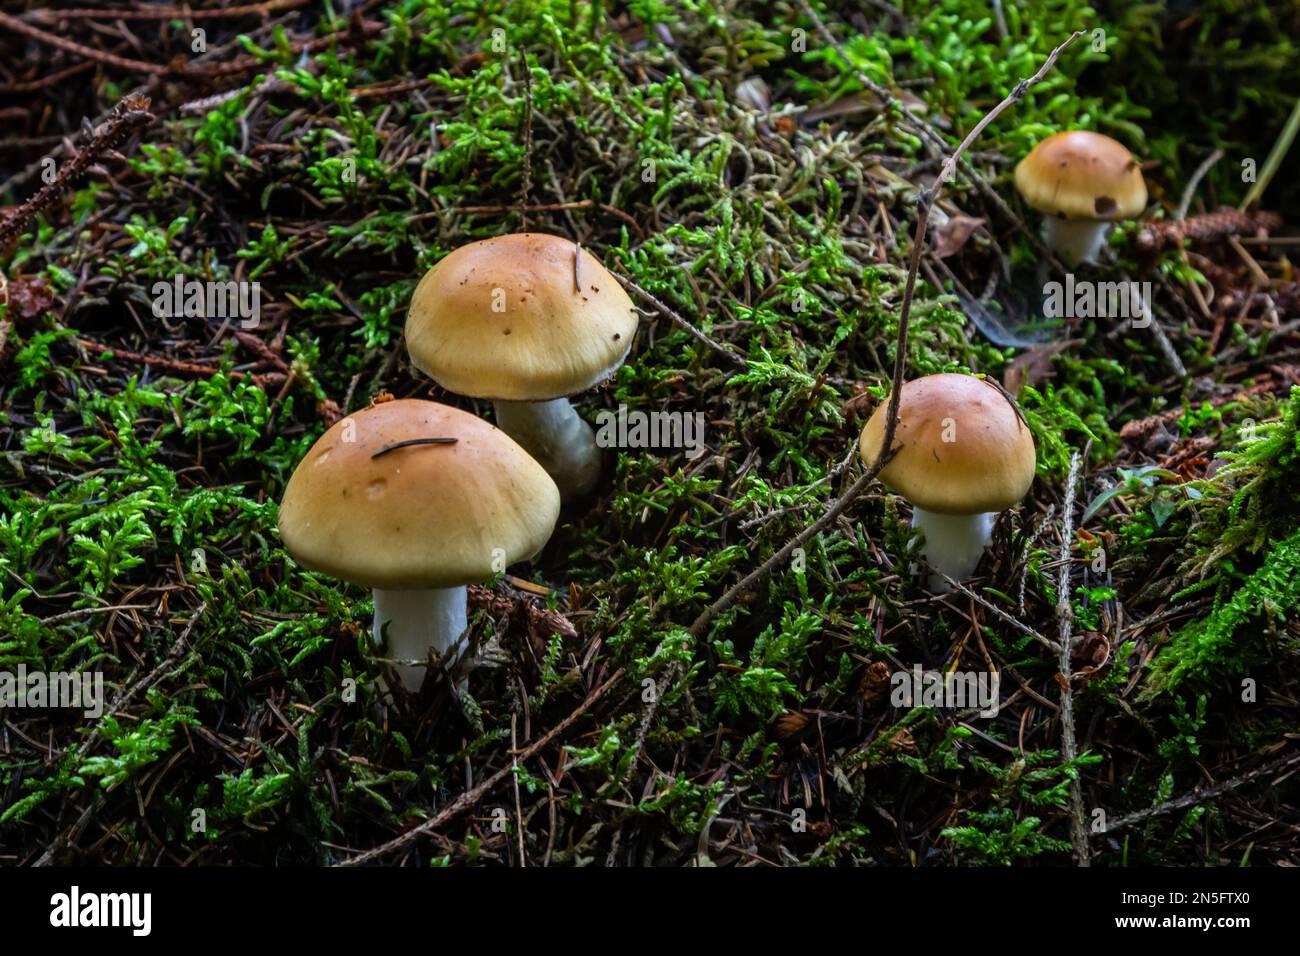 Hygrophorus olivaceoalbus, known as the olive wax cap, wild mushrooms. Stock Photo